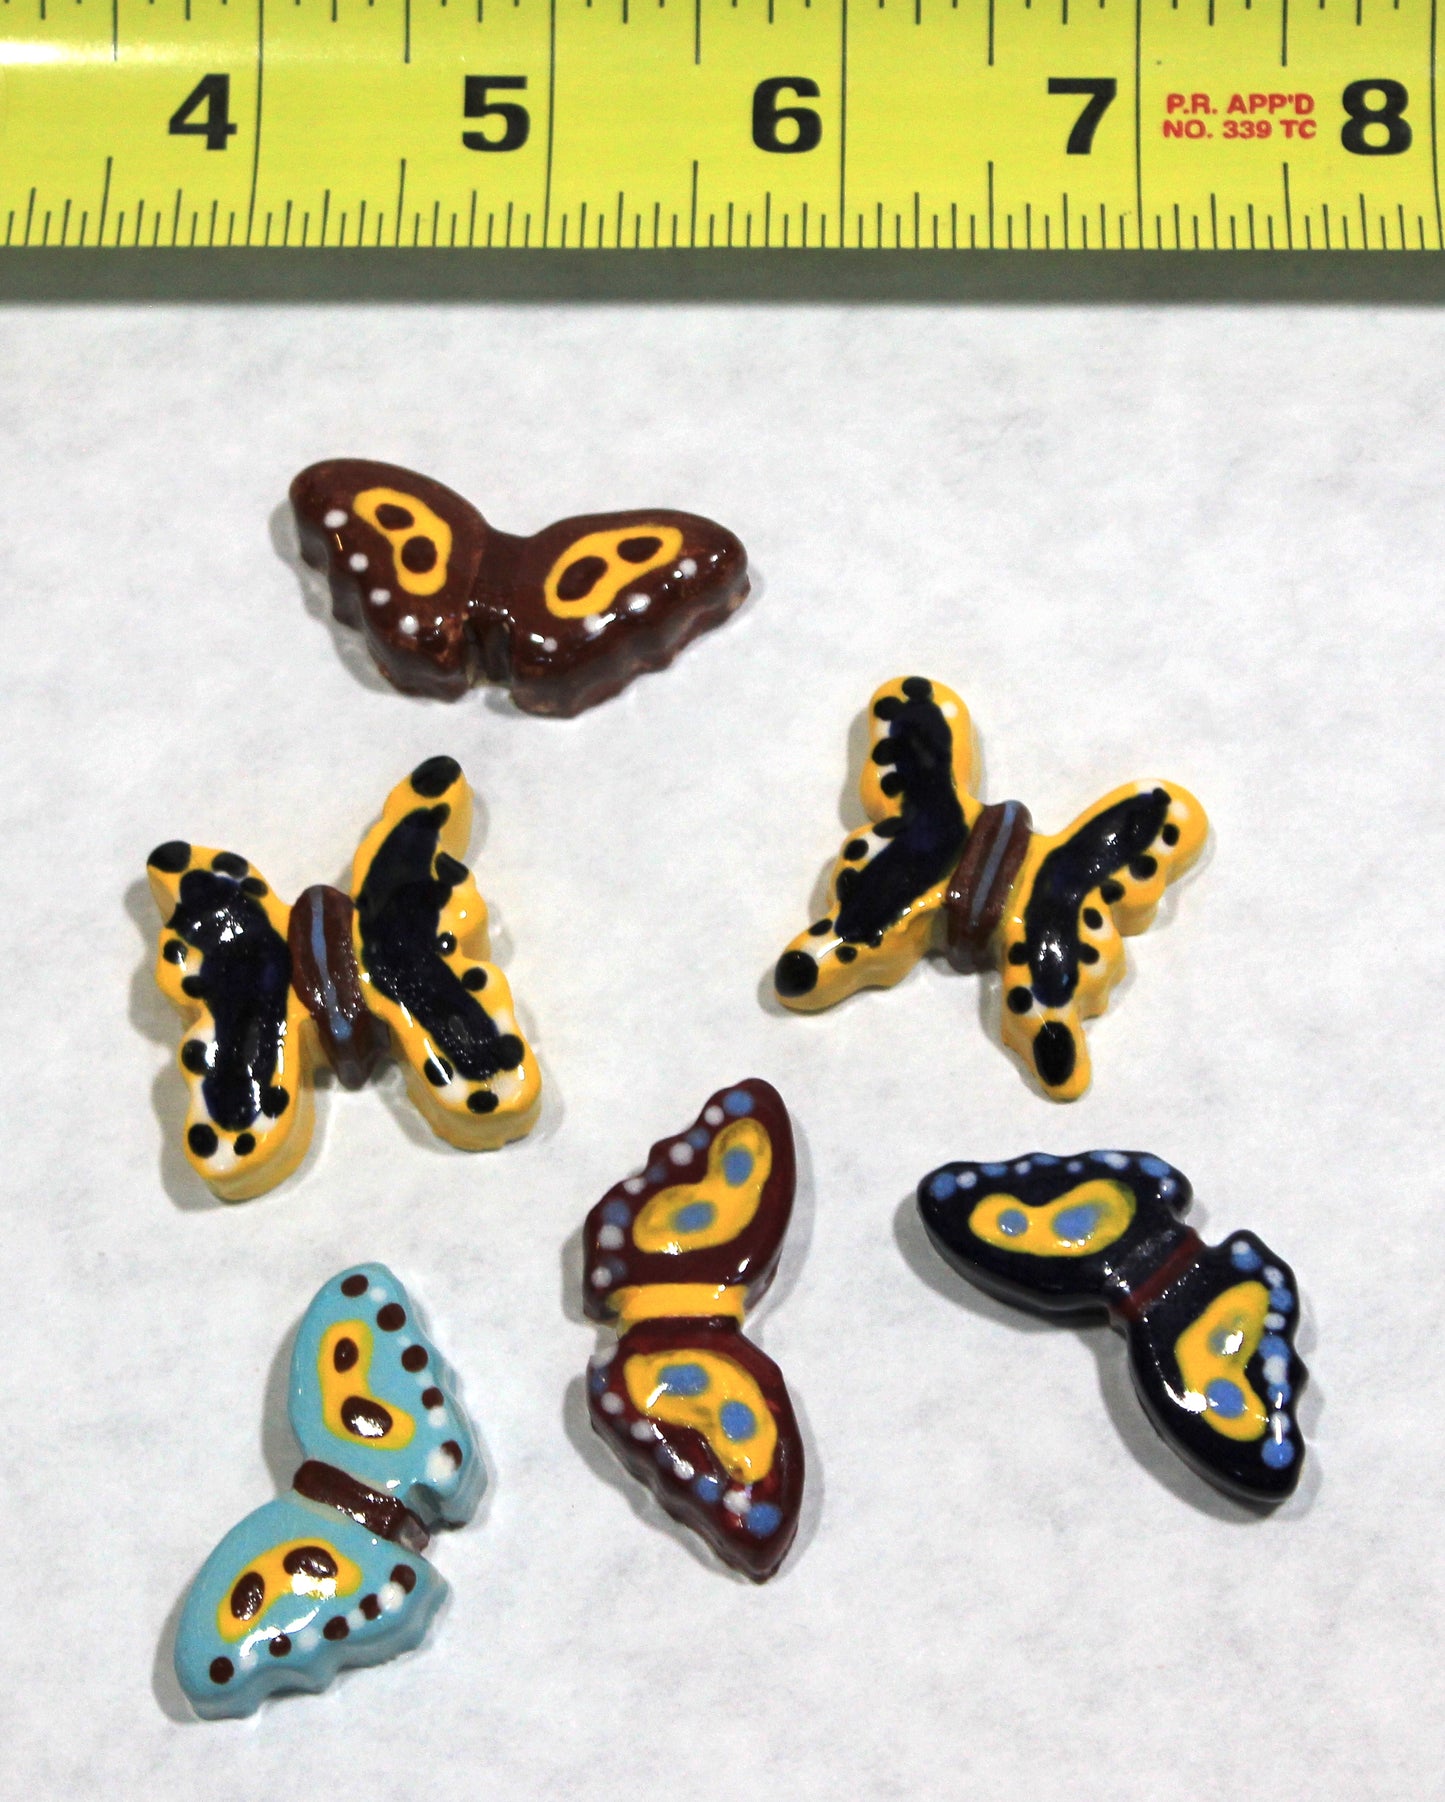 Small Hand-Painted Ceramic Butterfly Tile Set for Mosaics and Crafting